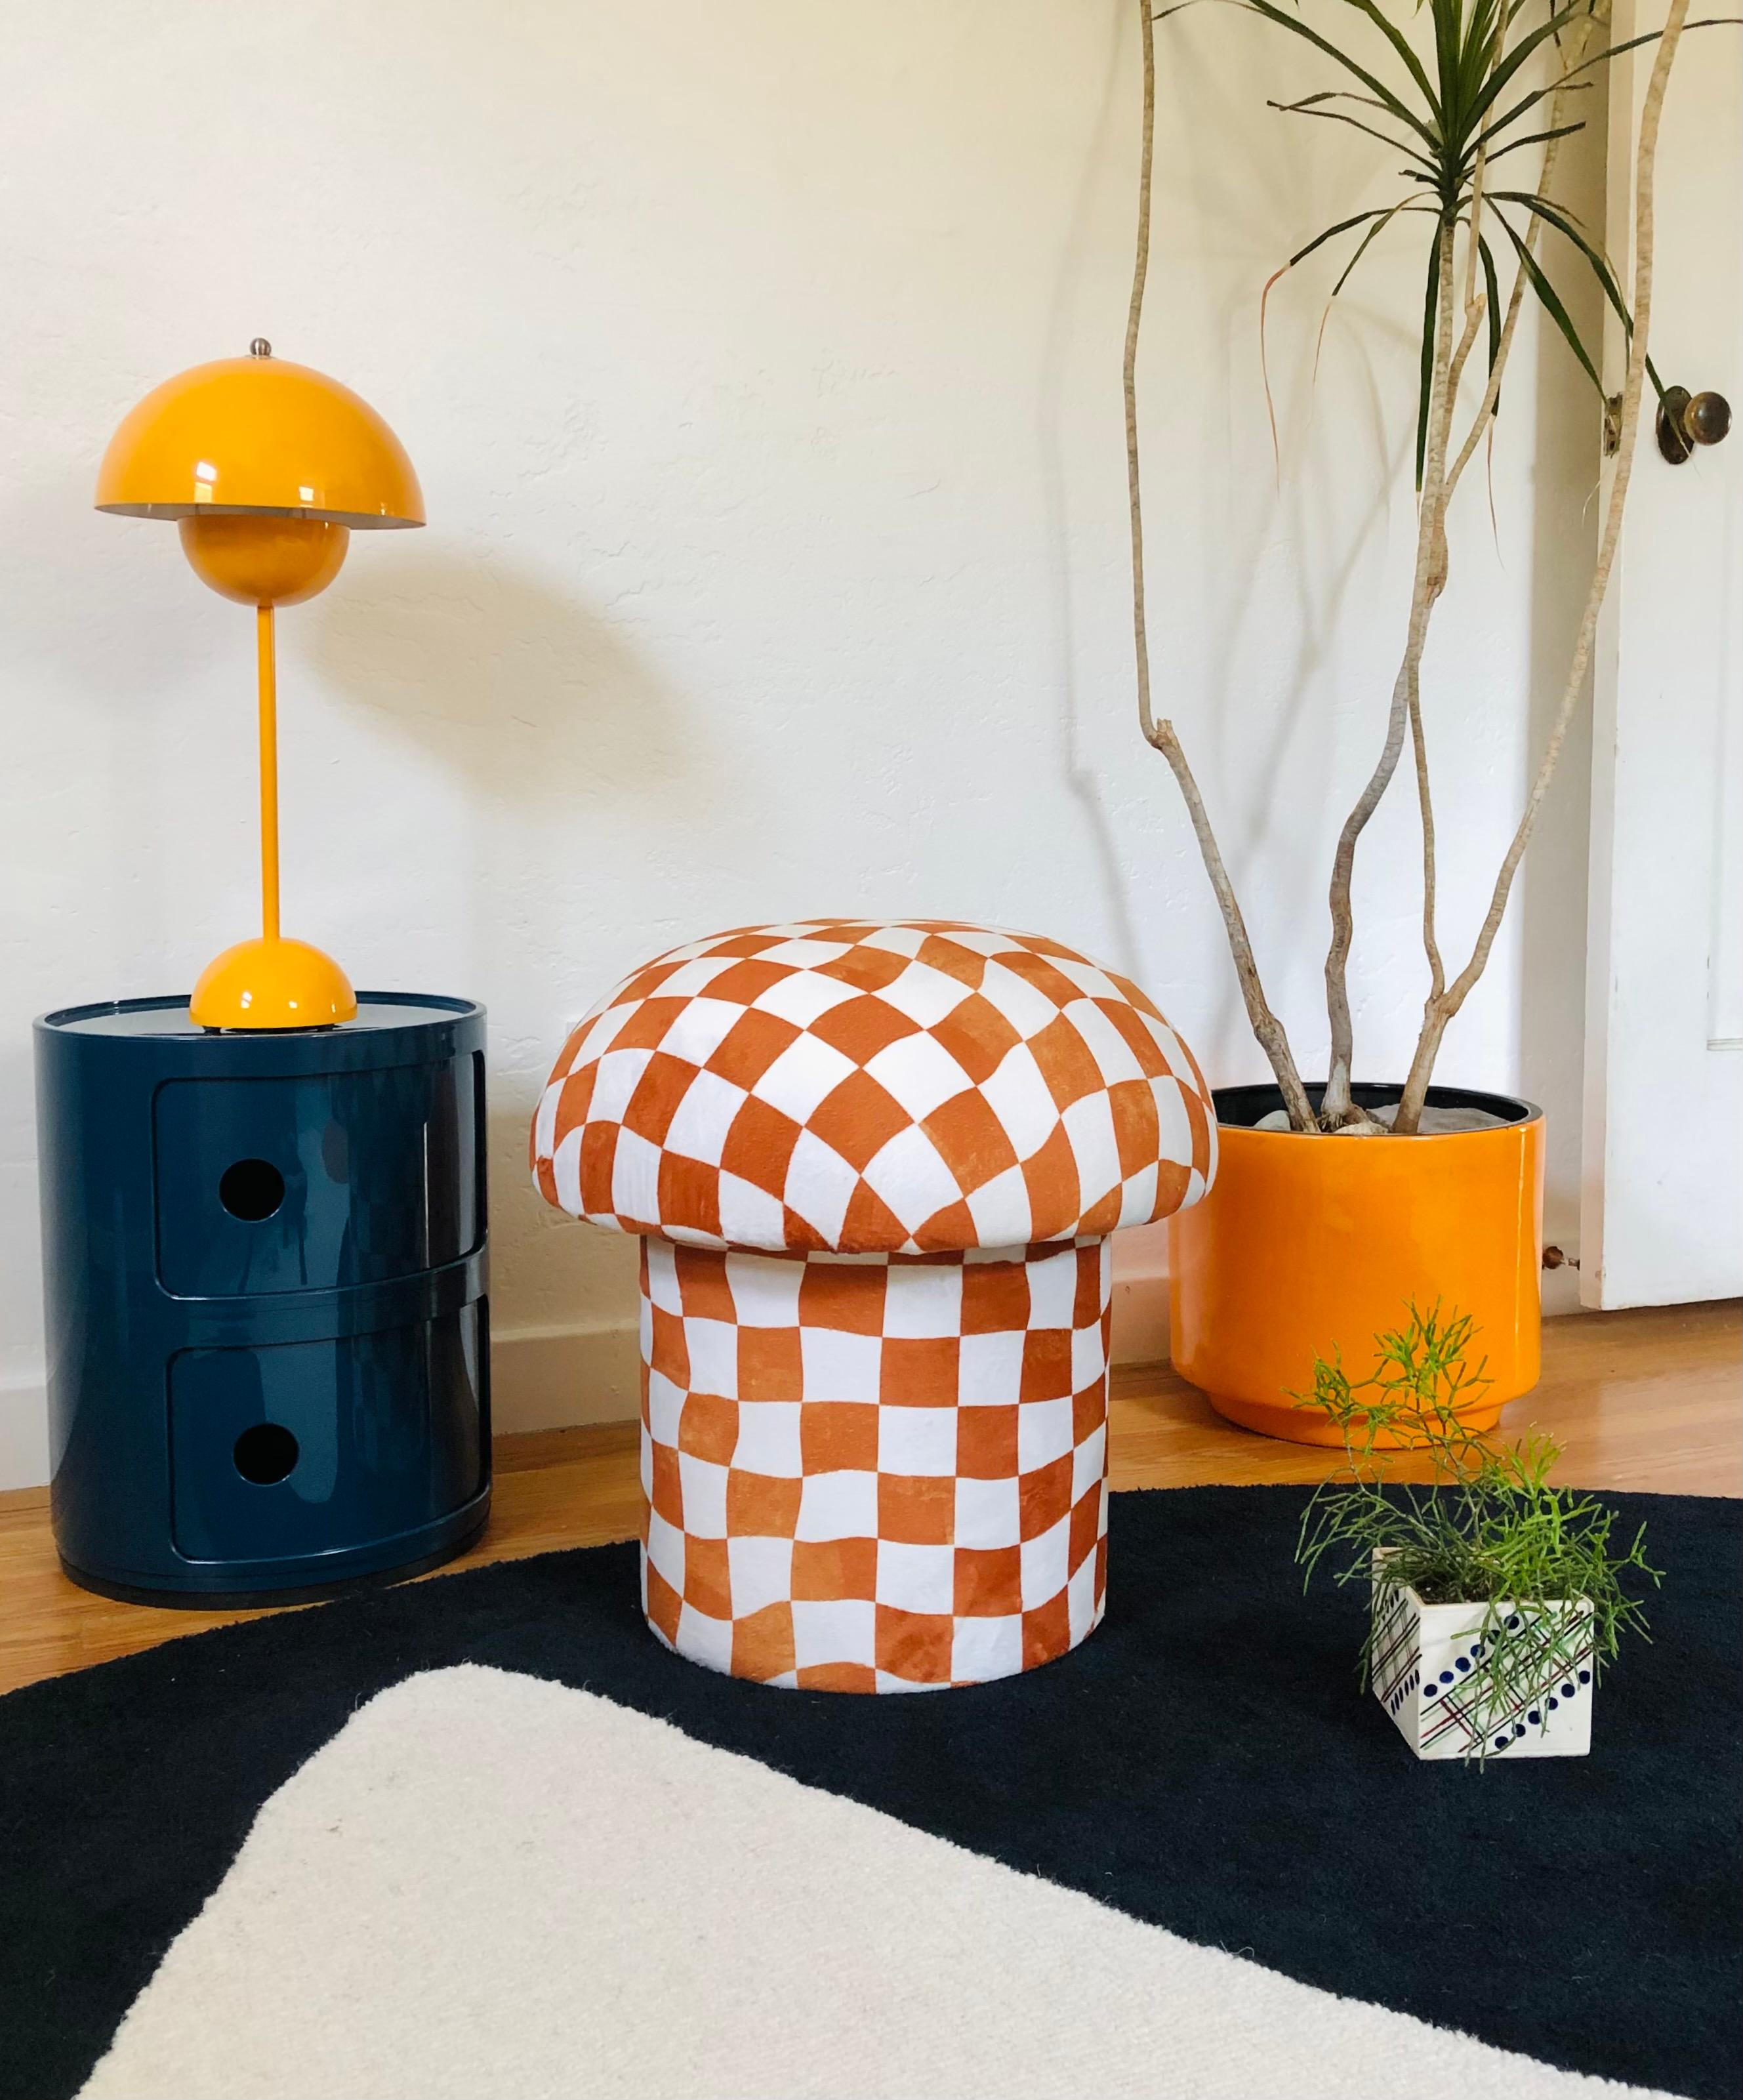 A handmade mushroom shaped ottoman, upholstered in a white and burnt orange warped checkerboard velvet fabric. Perfect for using as a footstool or extra occasional seating. A comfortable cushioned seat and sculptural accent piece.

PLEASE